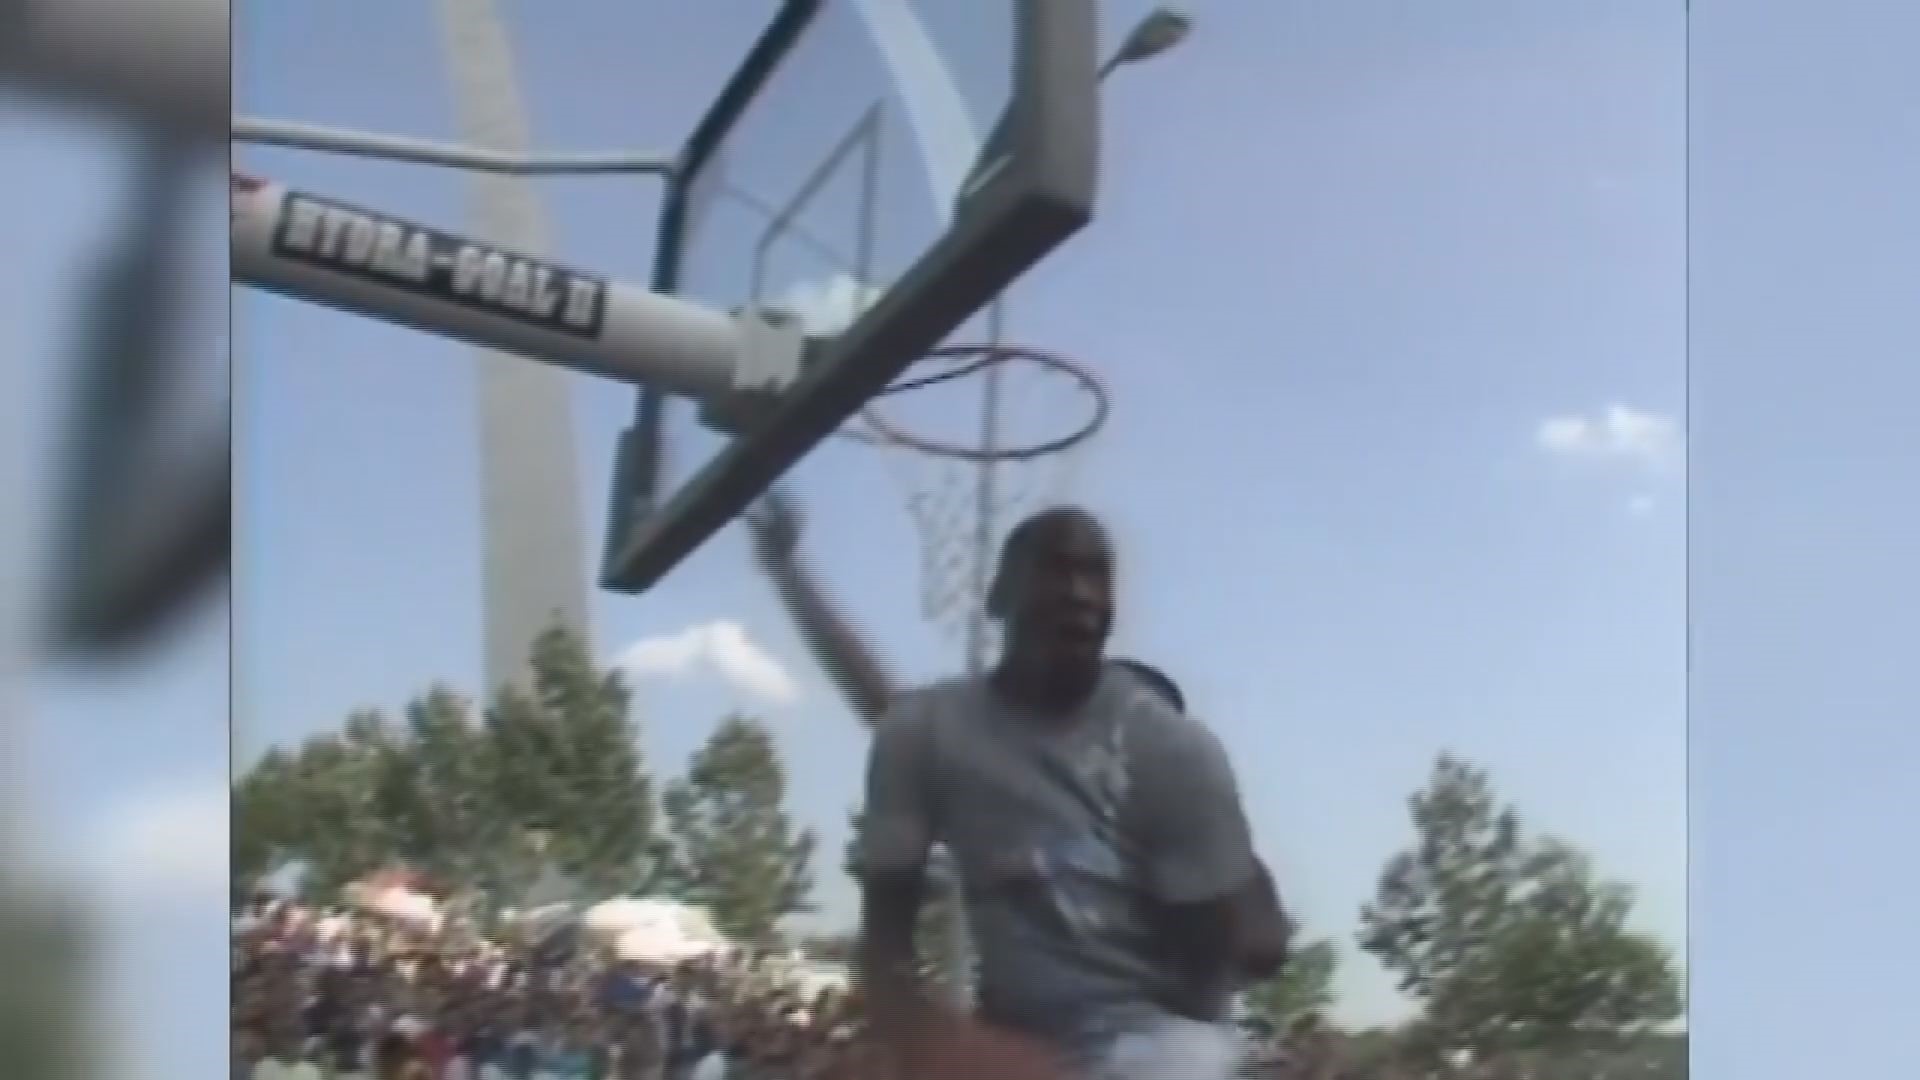 Some of the highest-flyers in NBA history brought their talents to St. Louis on July 4 weekend, 1986. Here's our report from their pickup game under the Gateway Arch